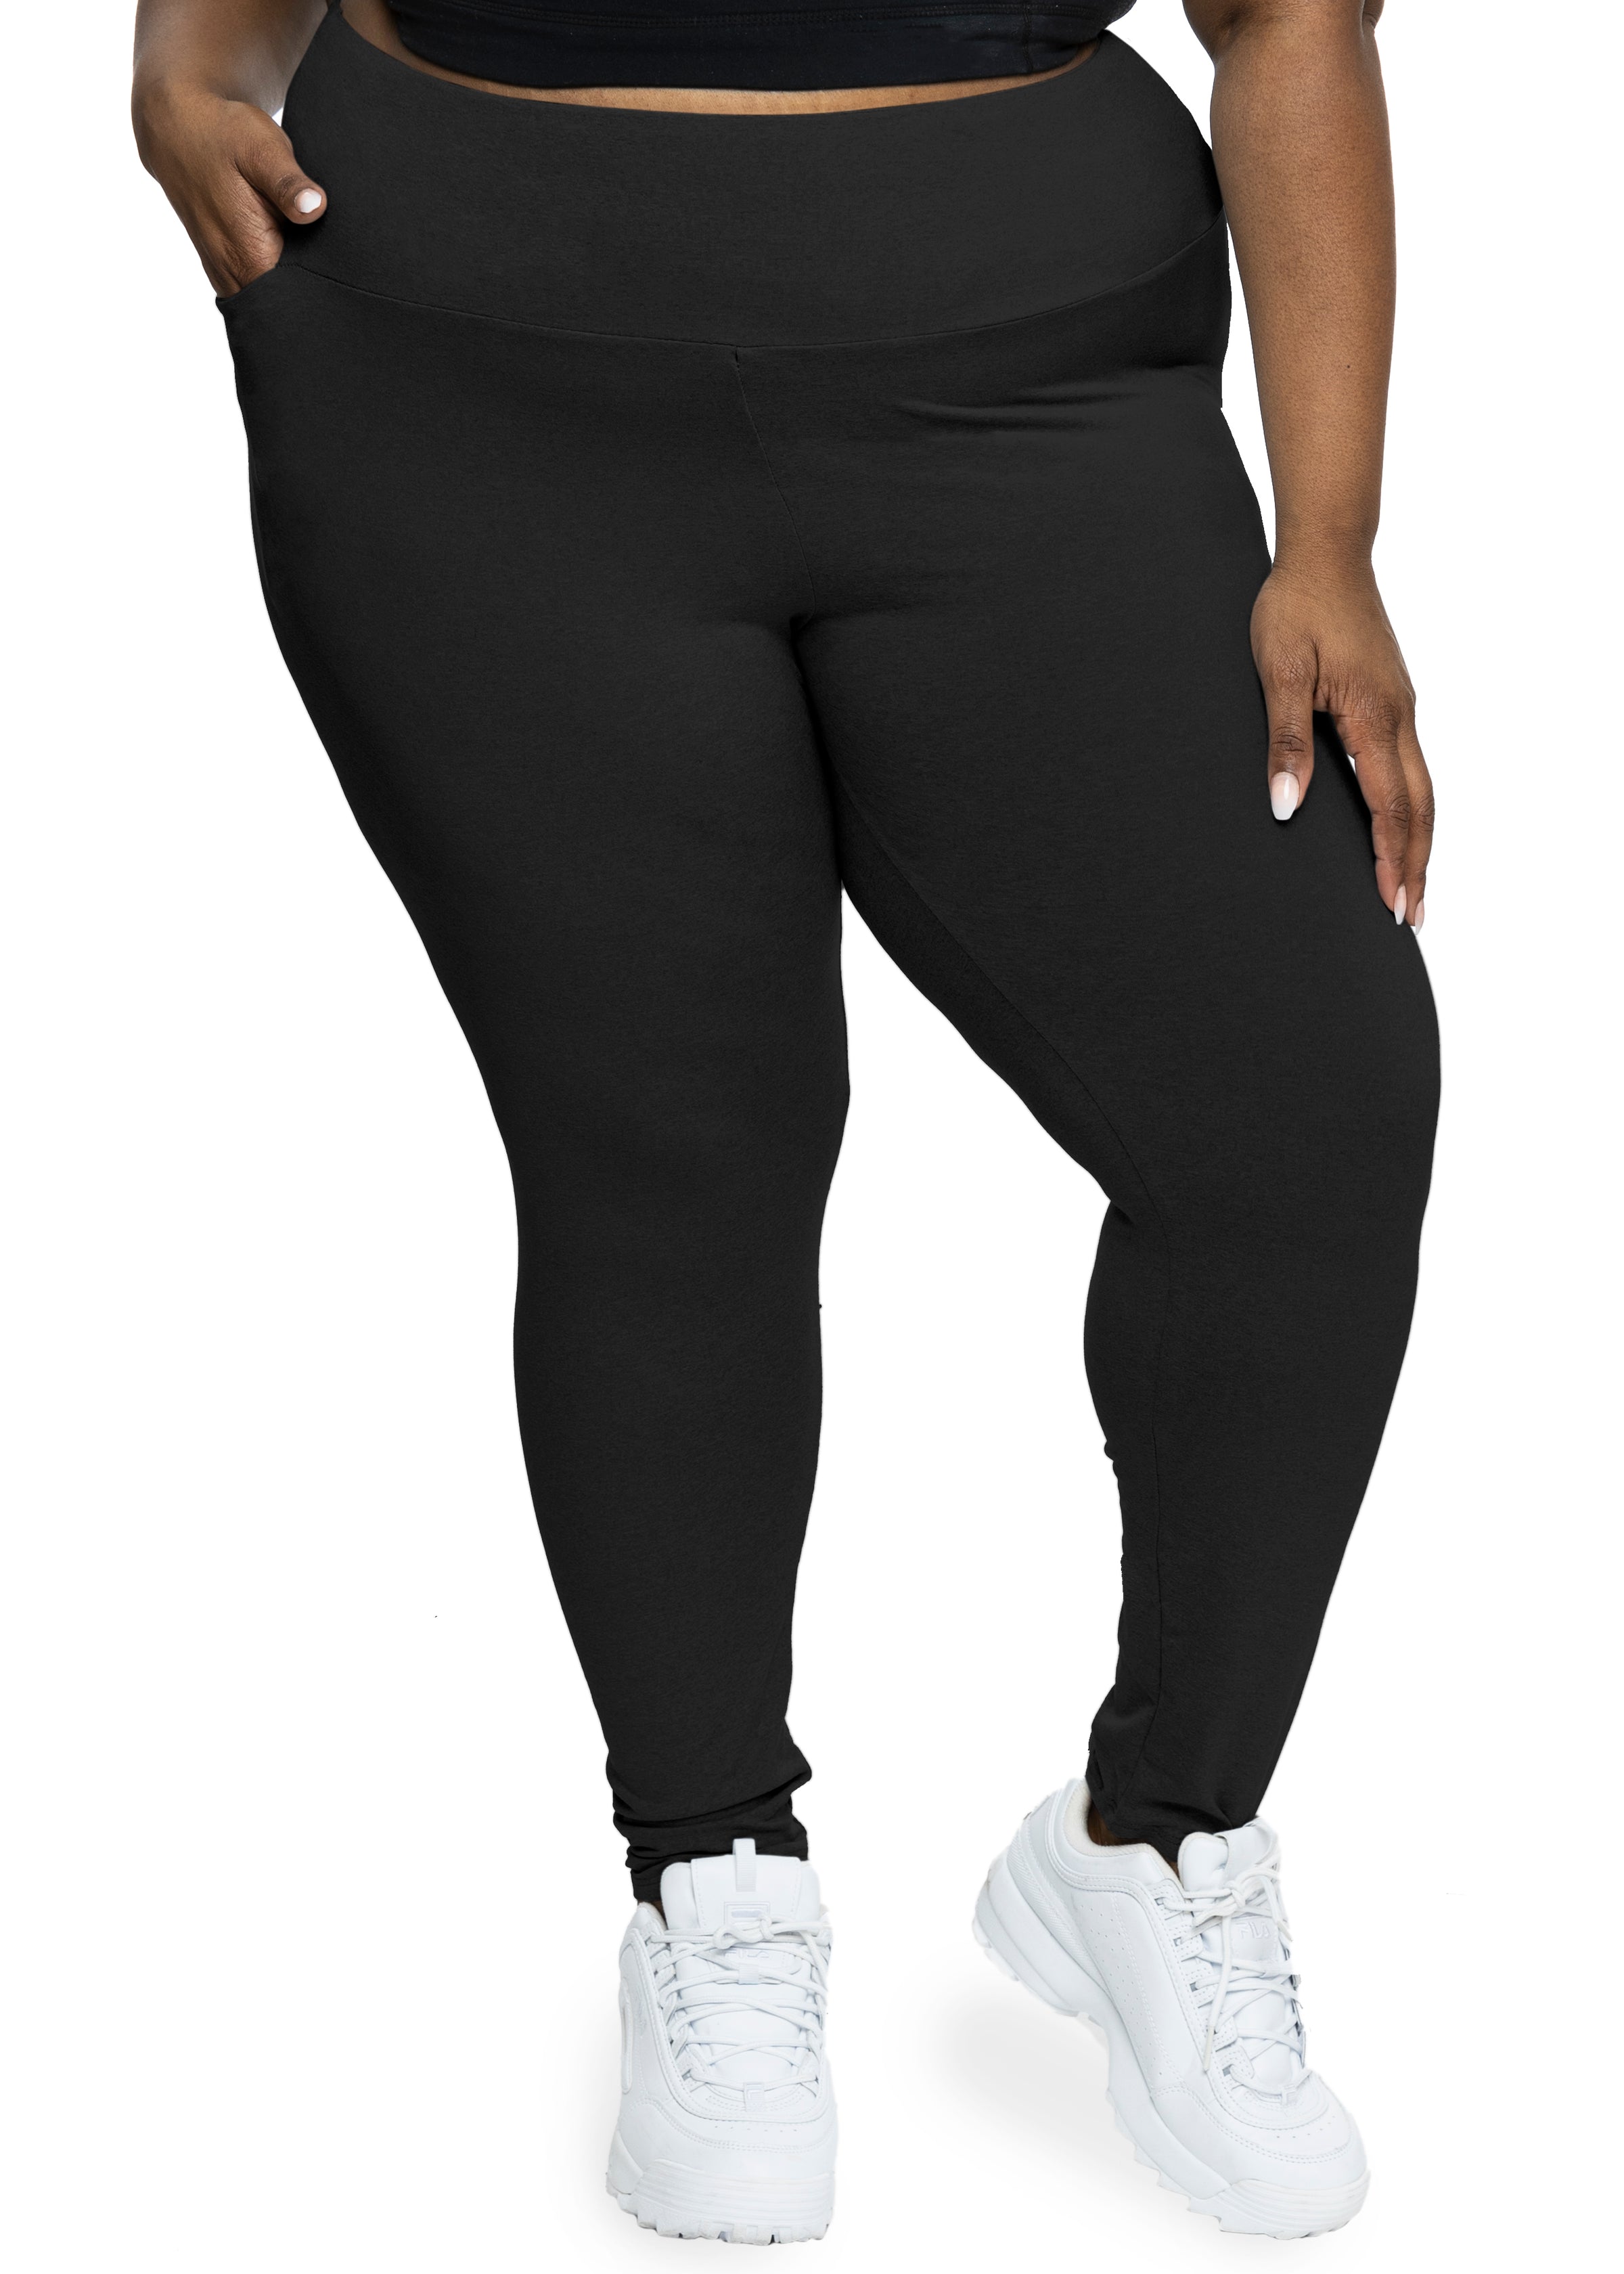 LETSFIND Arrival Women Plus Size Leggings Solid Black High Waist  Comfortable Breathe Freely Fitness Stretch Leggings 211204 From 9,6 €